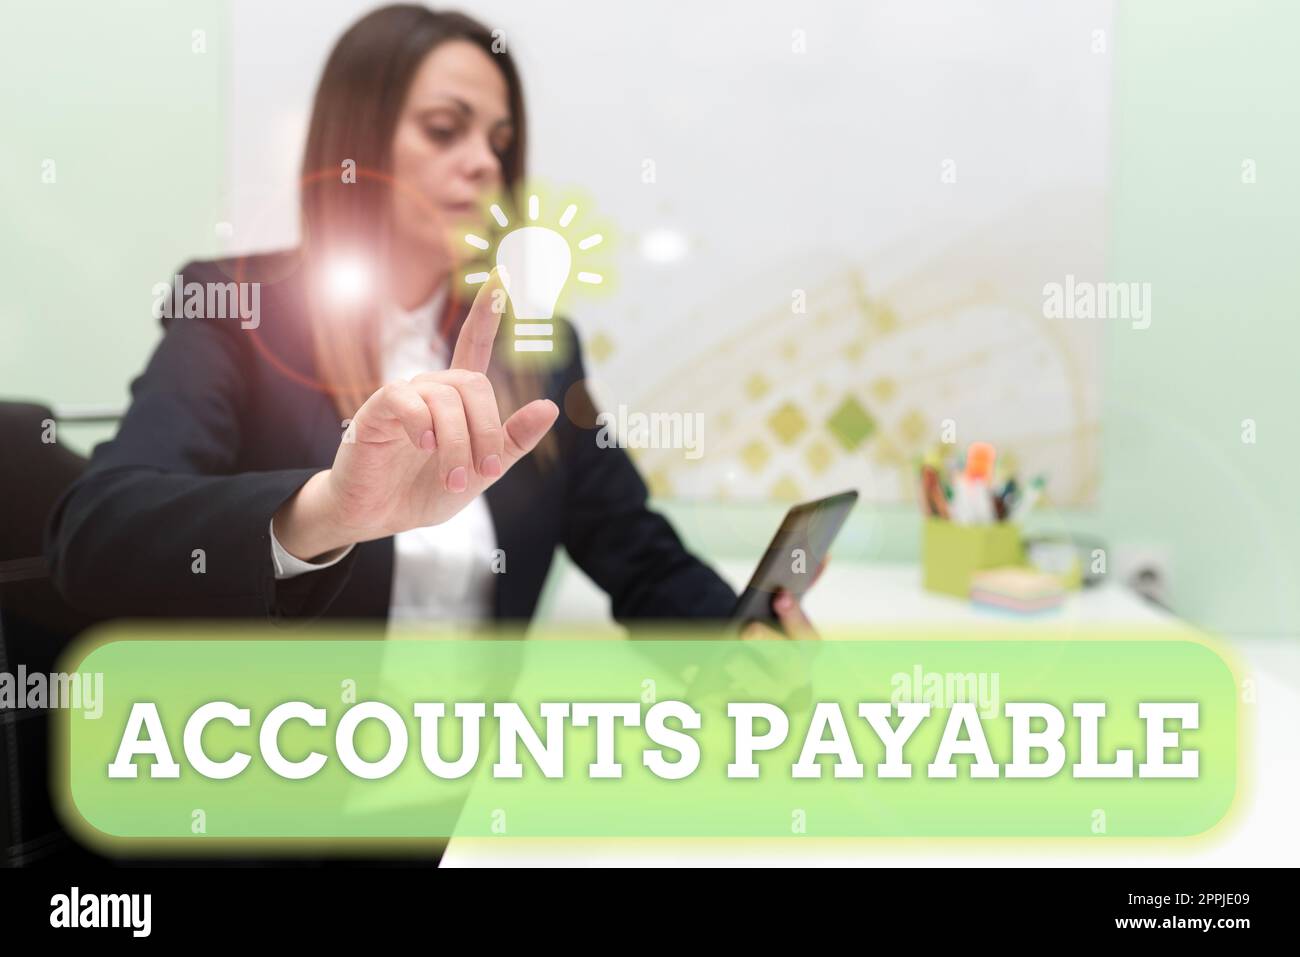 Writing displaying text Accounts Payable. Internet Concept money owed by a business to its suppliers as a liability Stock Photo